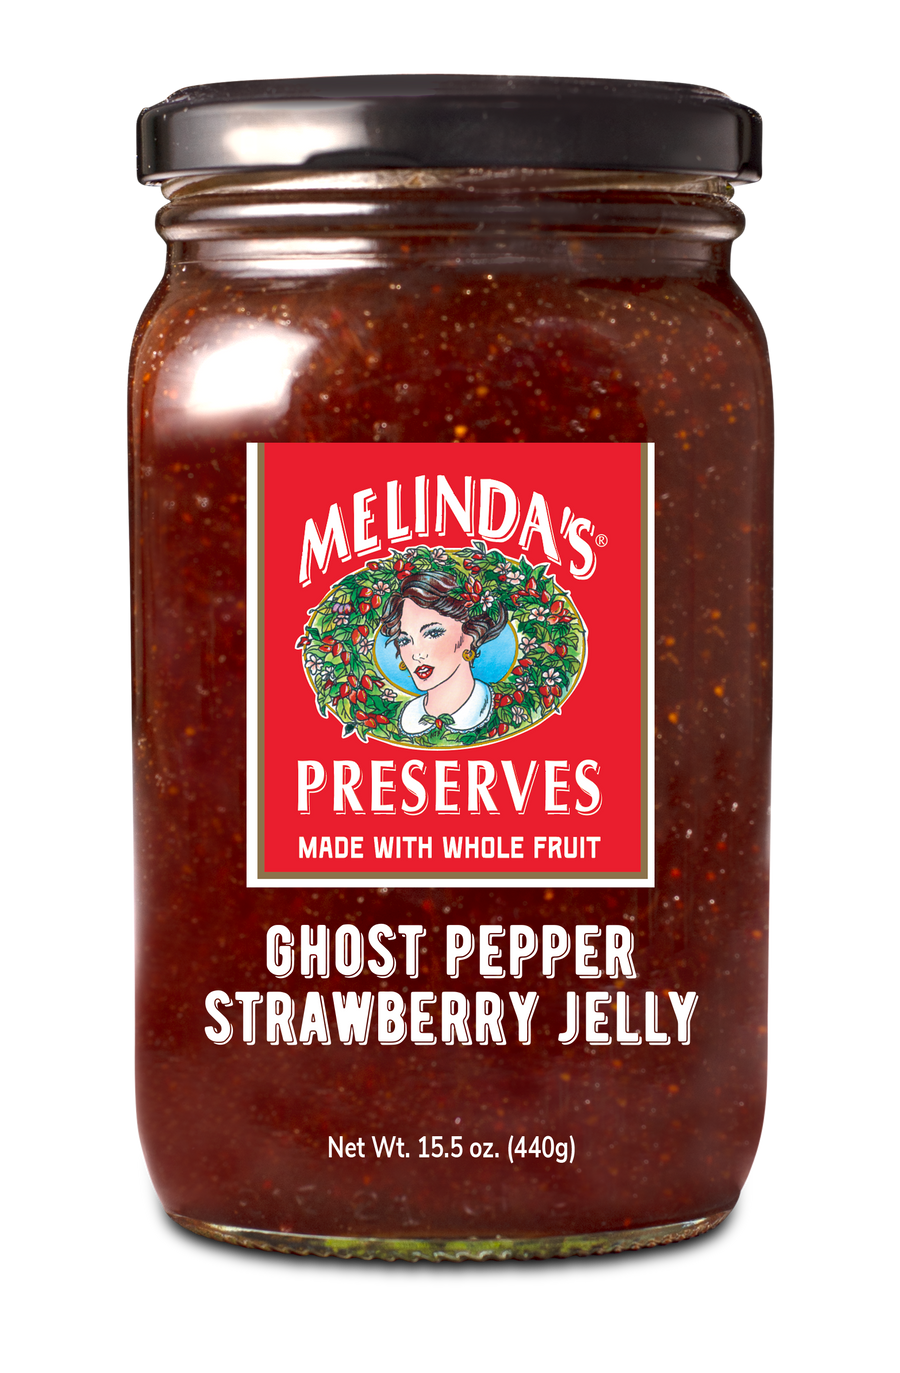 A jar of Melinda's Ghost Strawberry Jelly with a label.